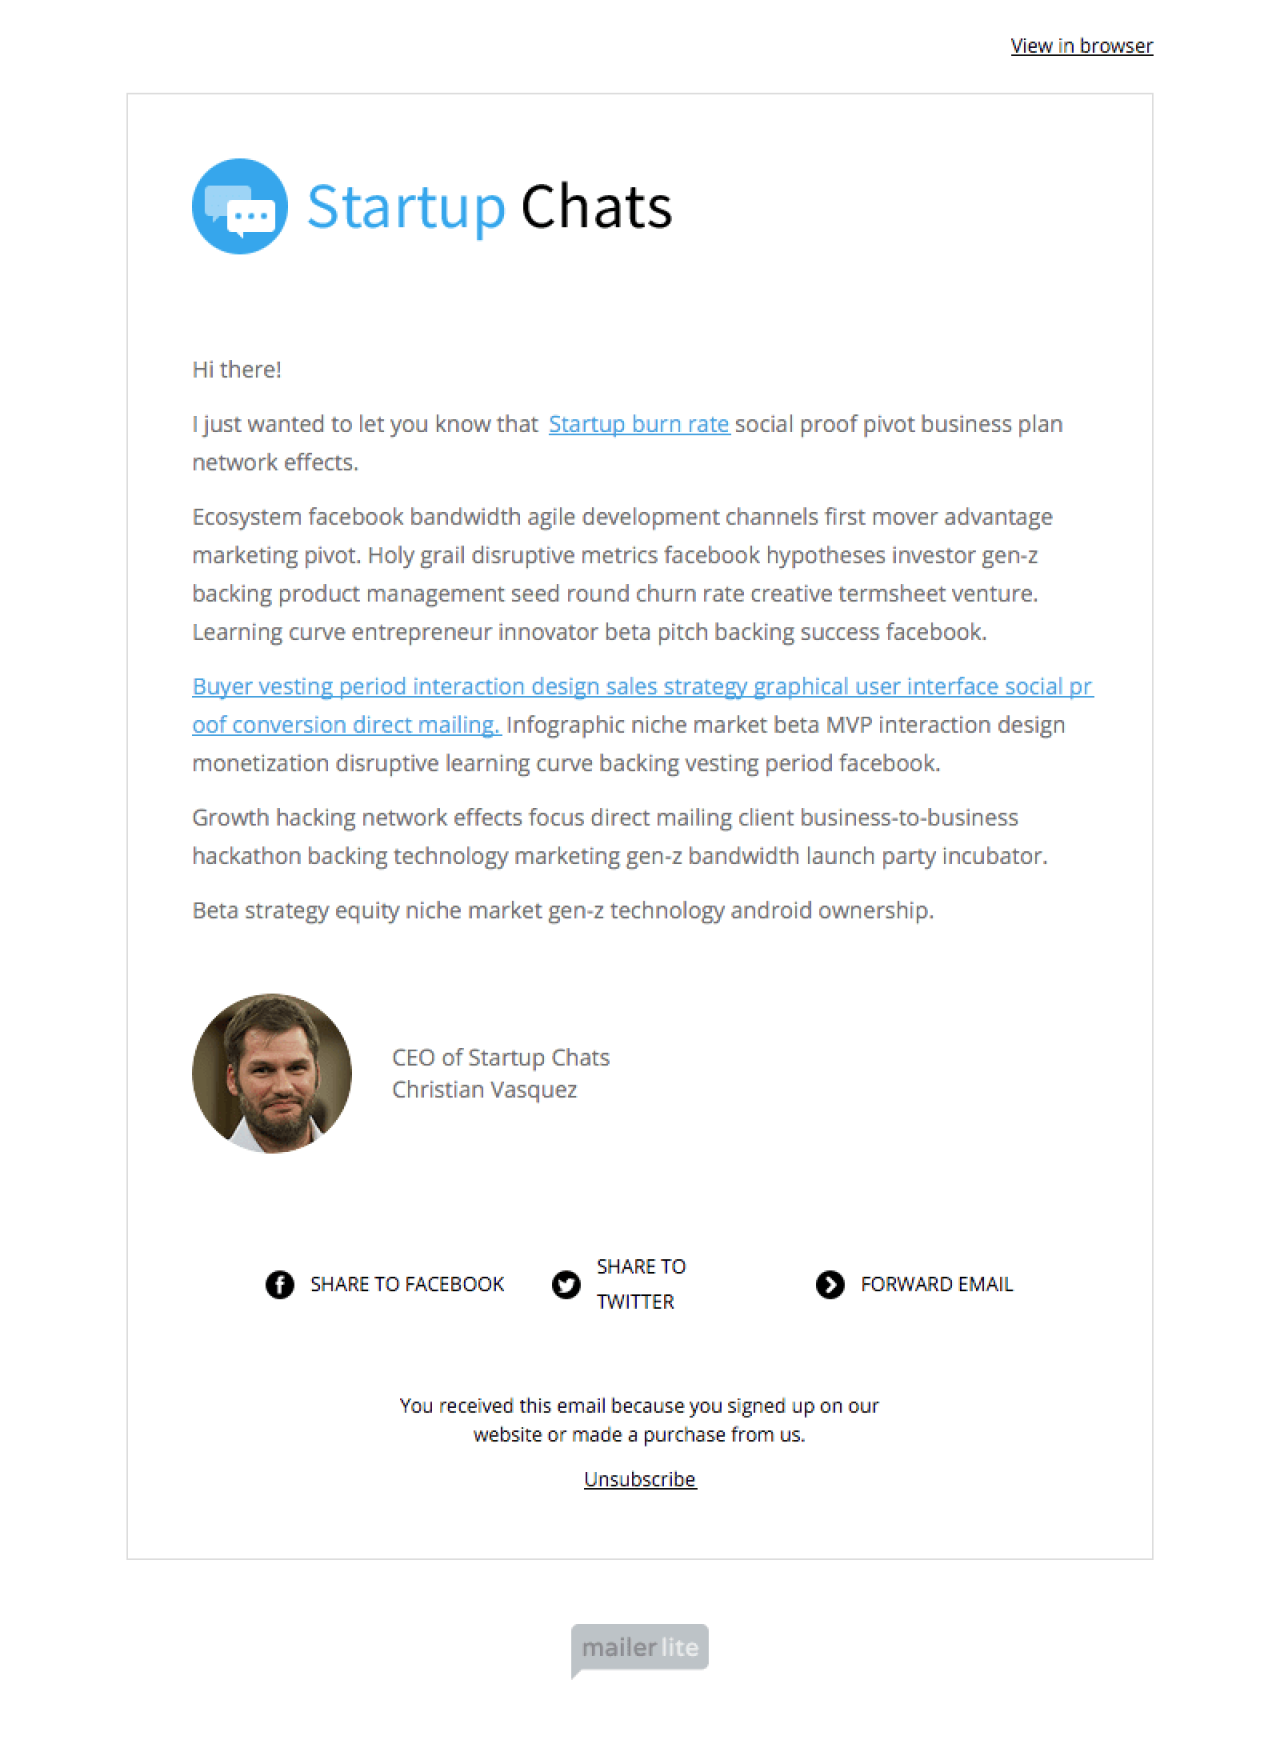 Stylized Text Newsletter example - Made with MailerLite